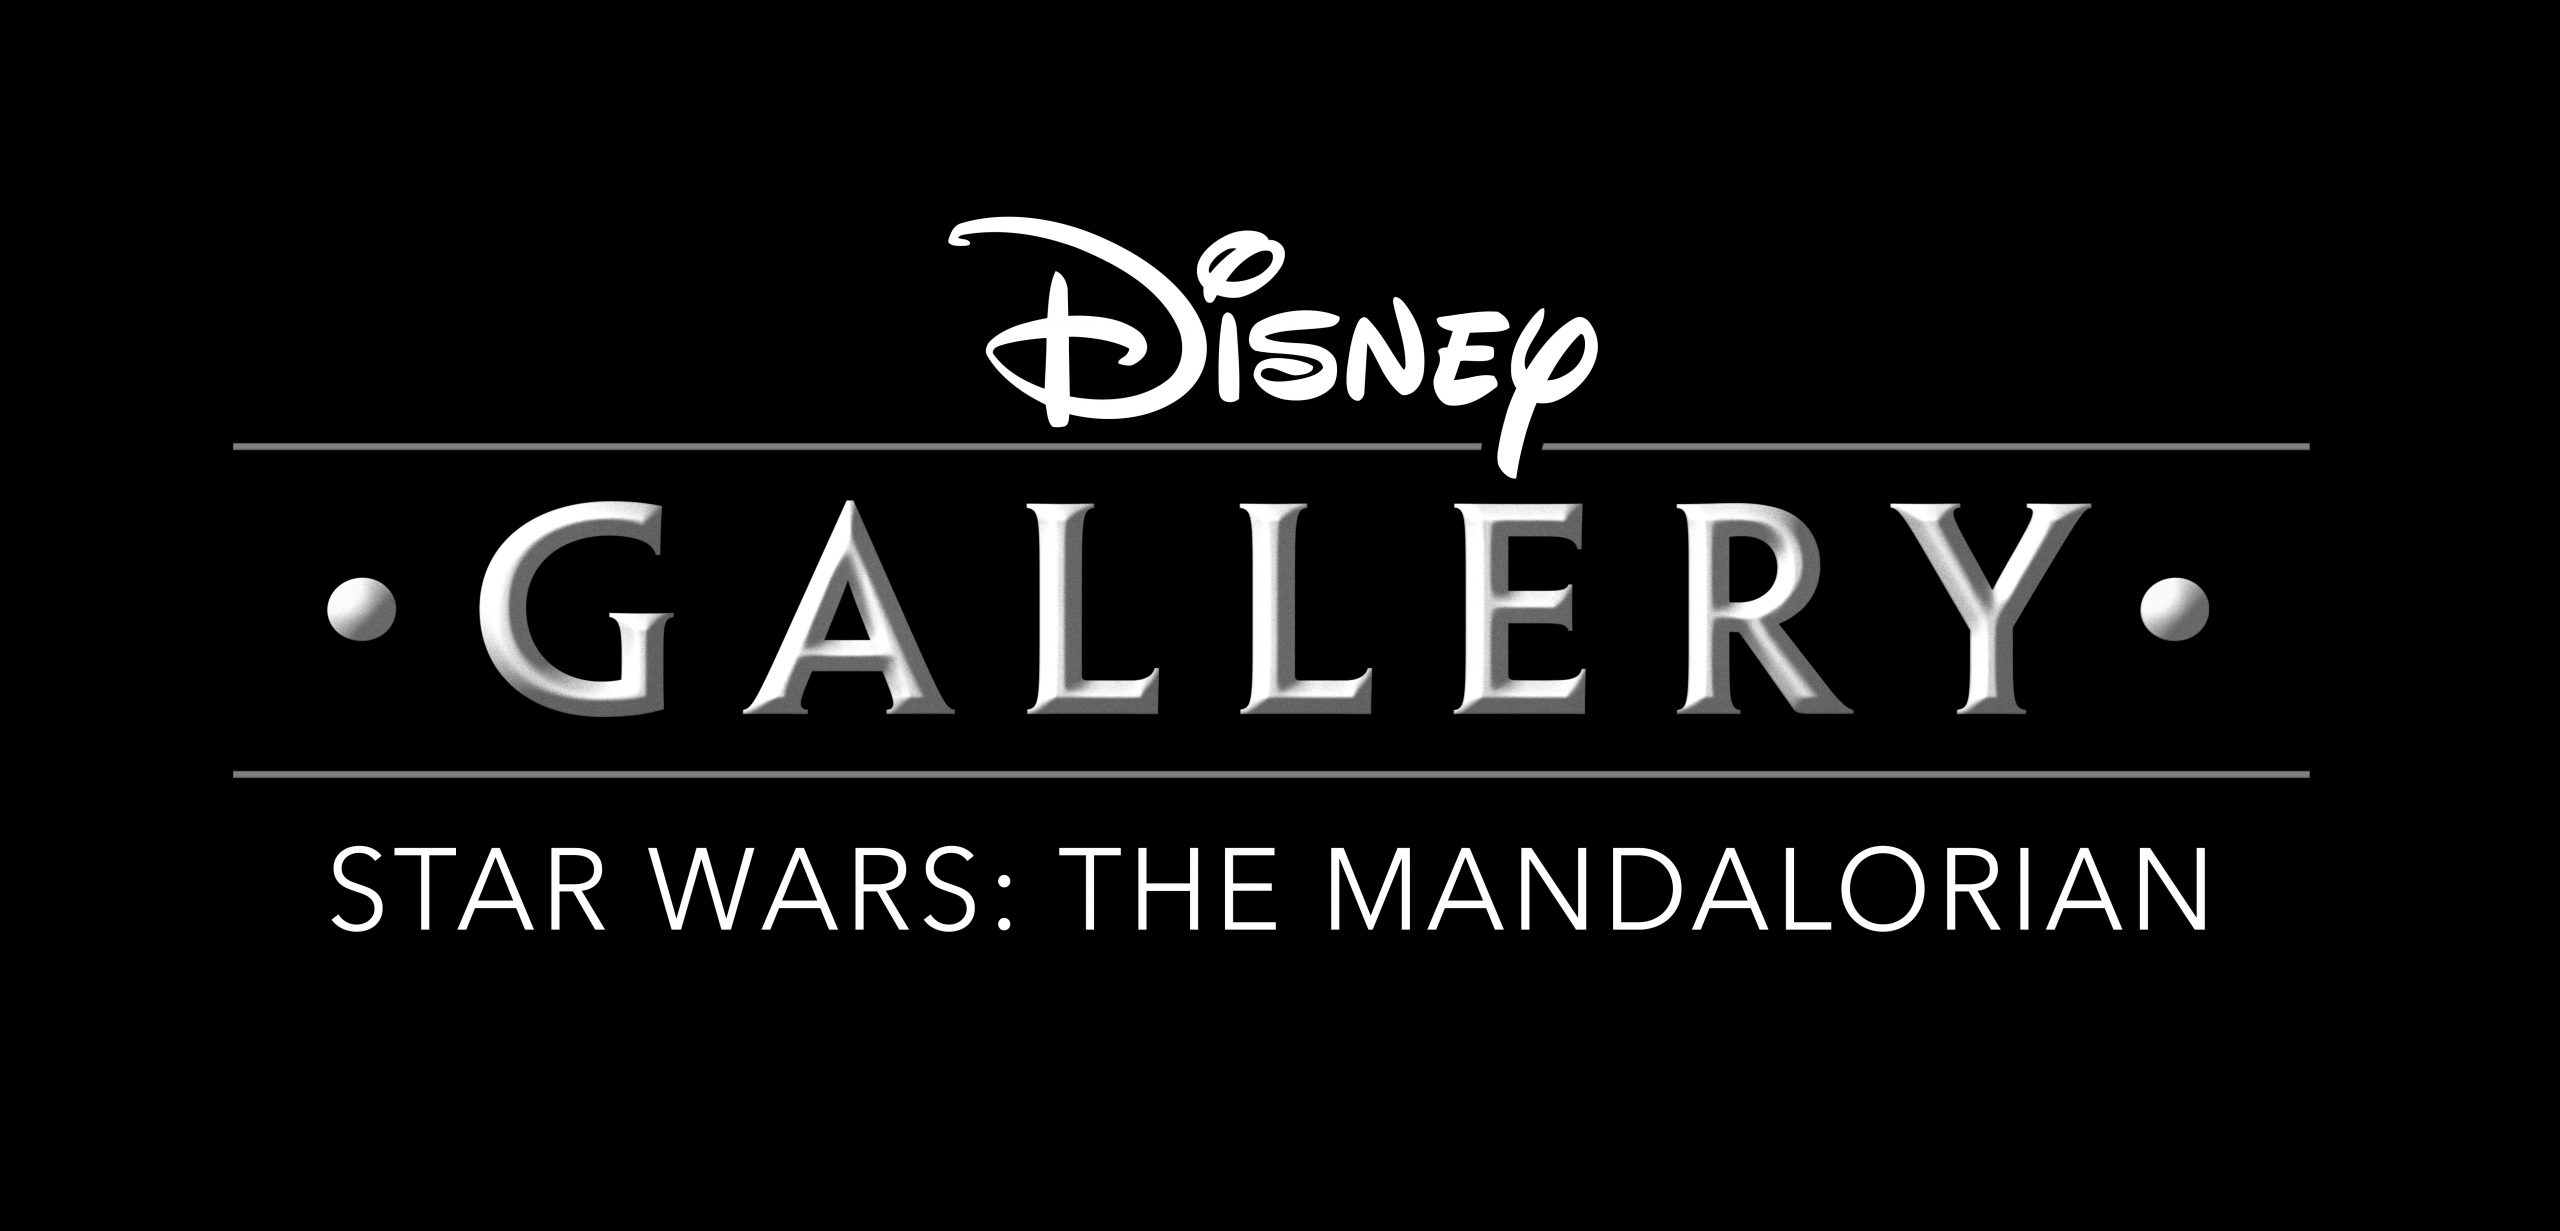 [News] Disney+ Honors Star Wars Day with Premiere of Disney Gallery: The Mandalorian and More!